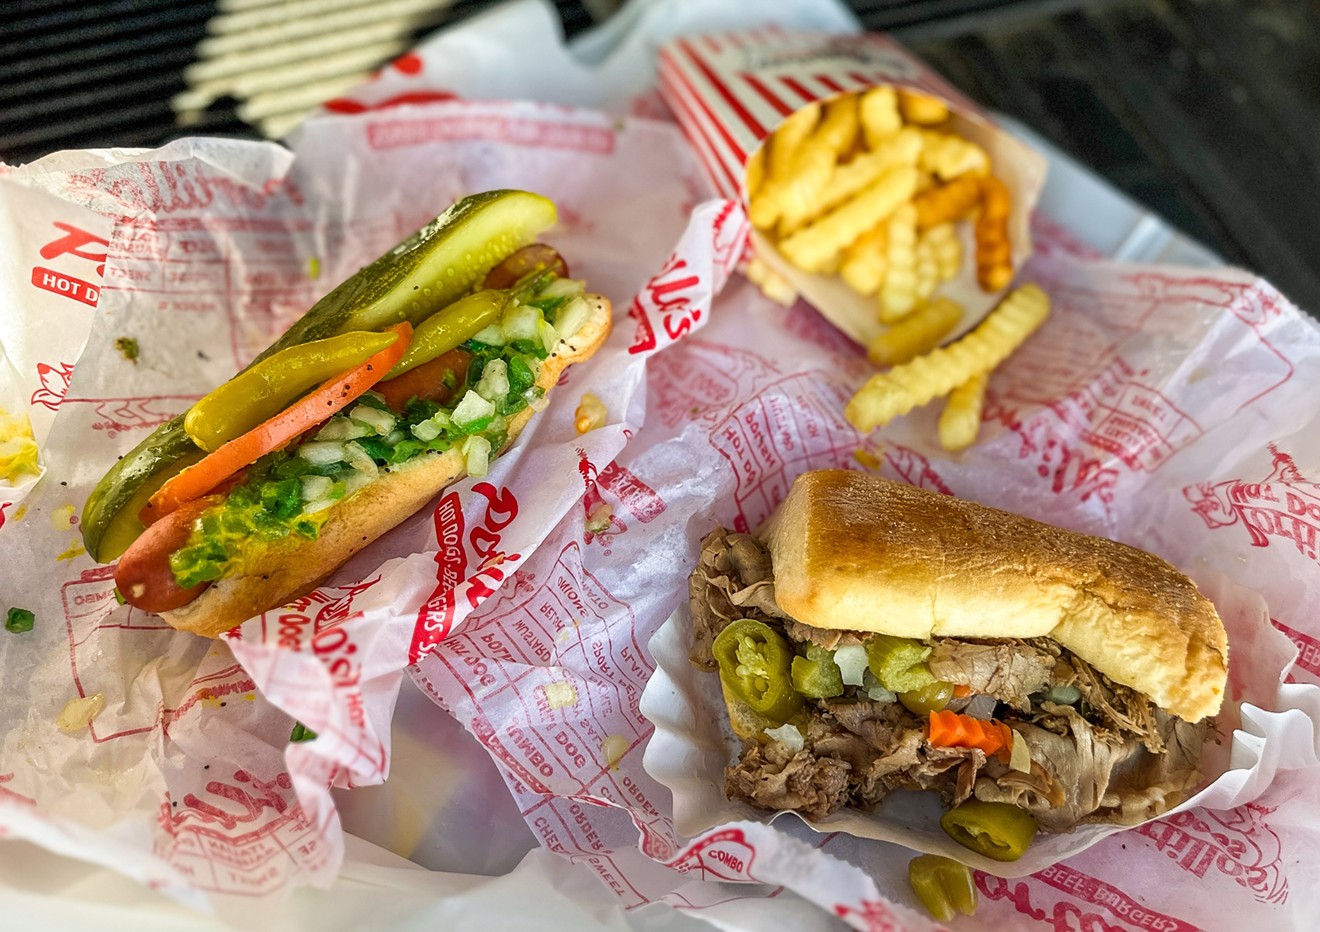 A hot dog, Italian beef and French fries from Portillo's Beef Bus in The Colony.